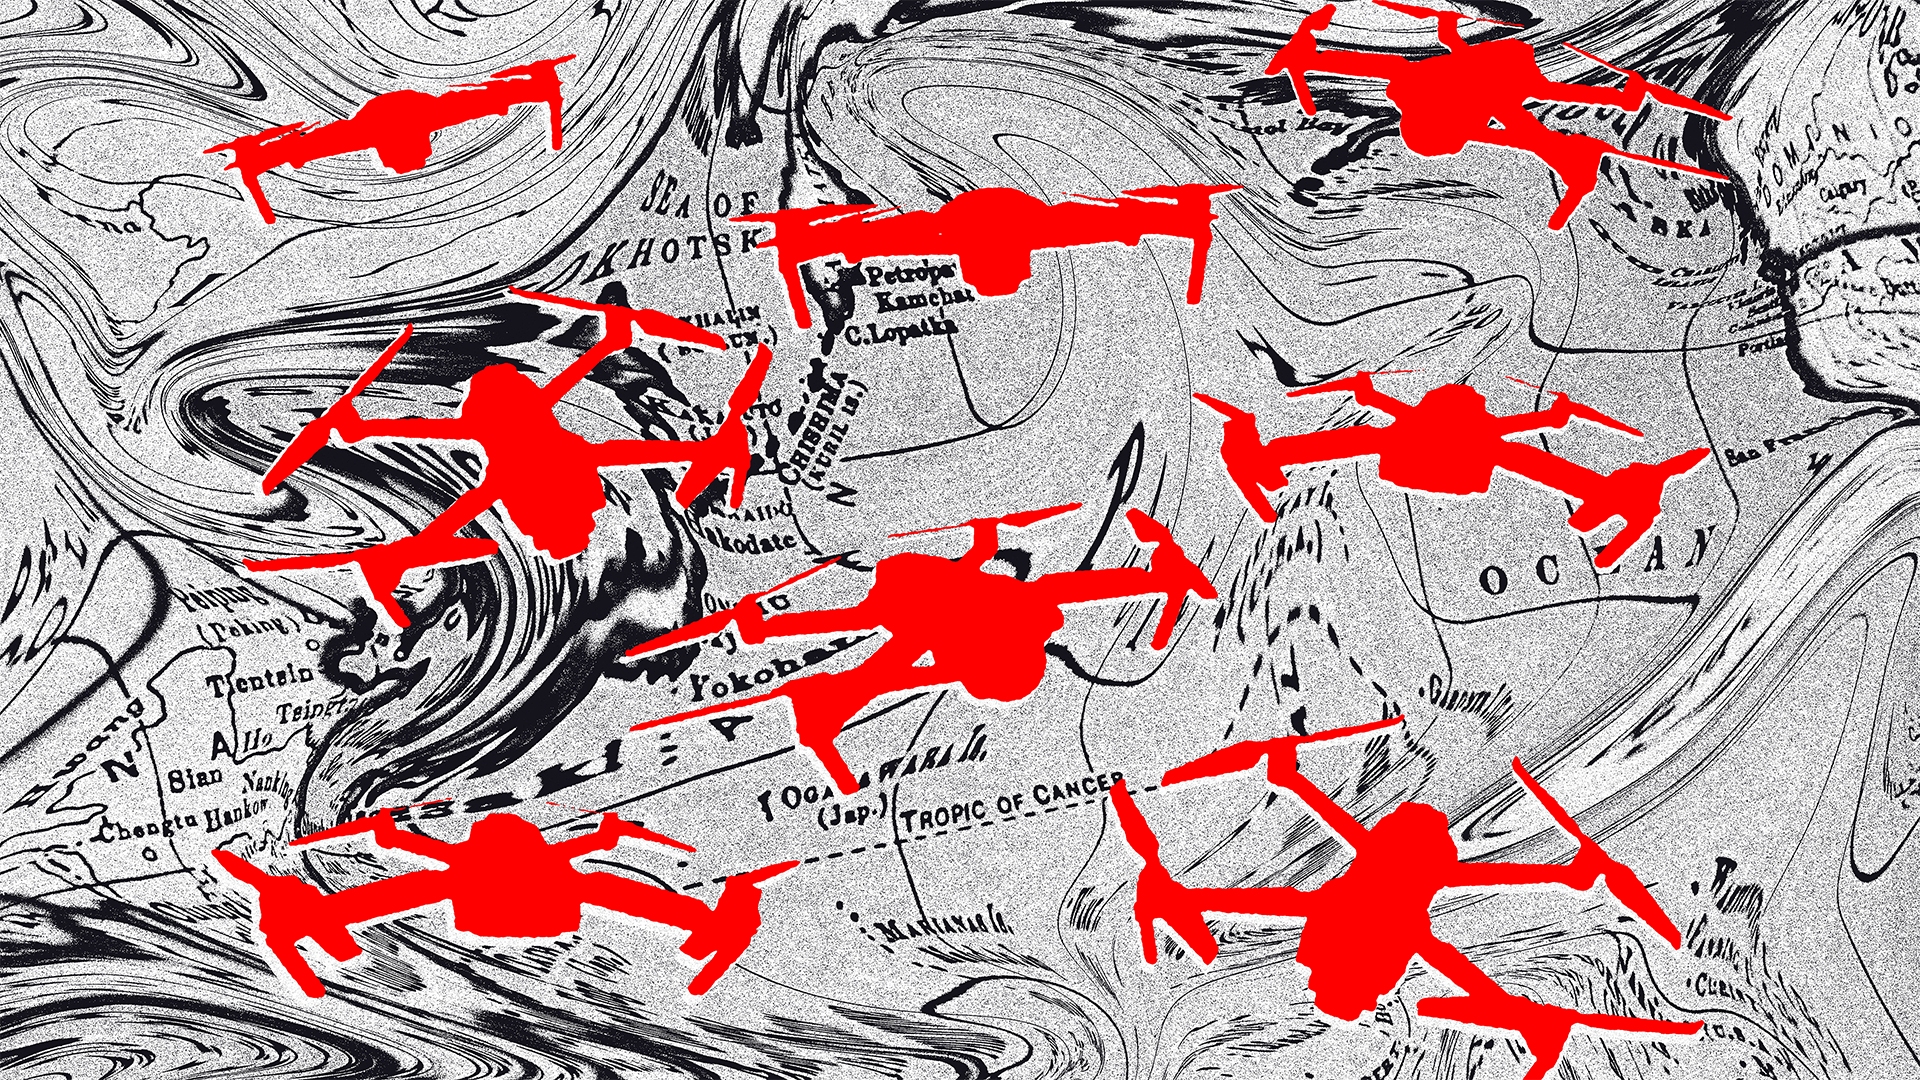 An illustration shows various drone shapes in bright red moving above a warped black and white map.